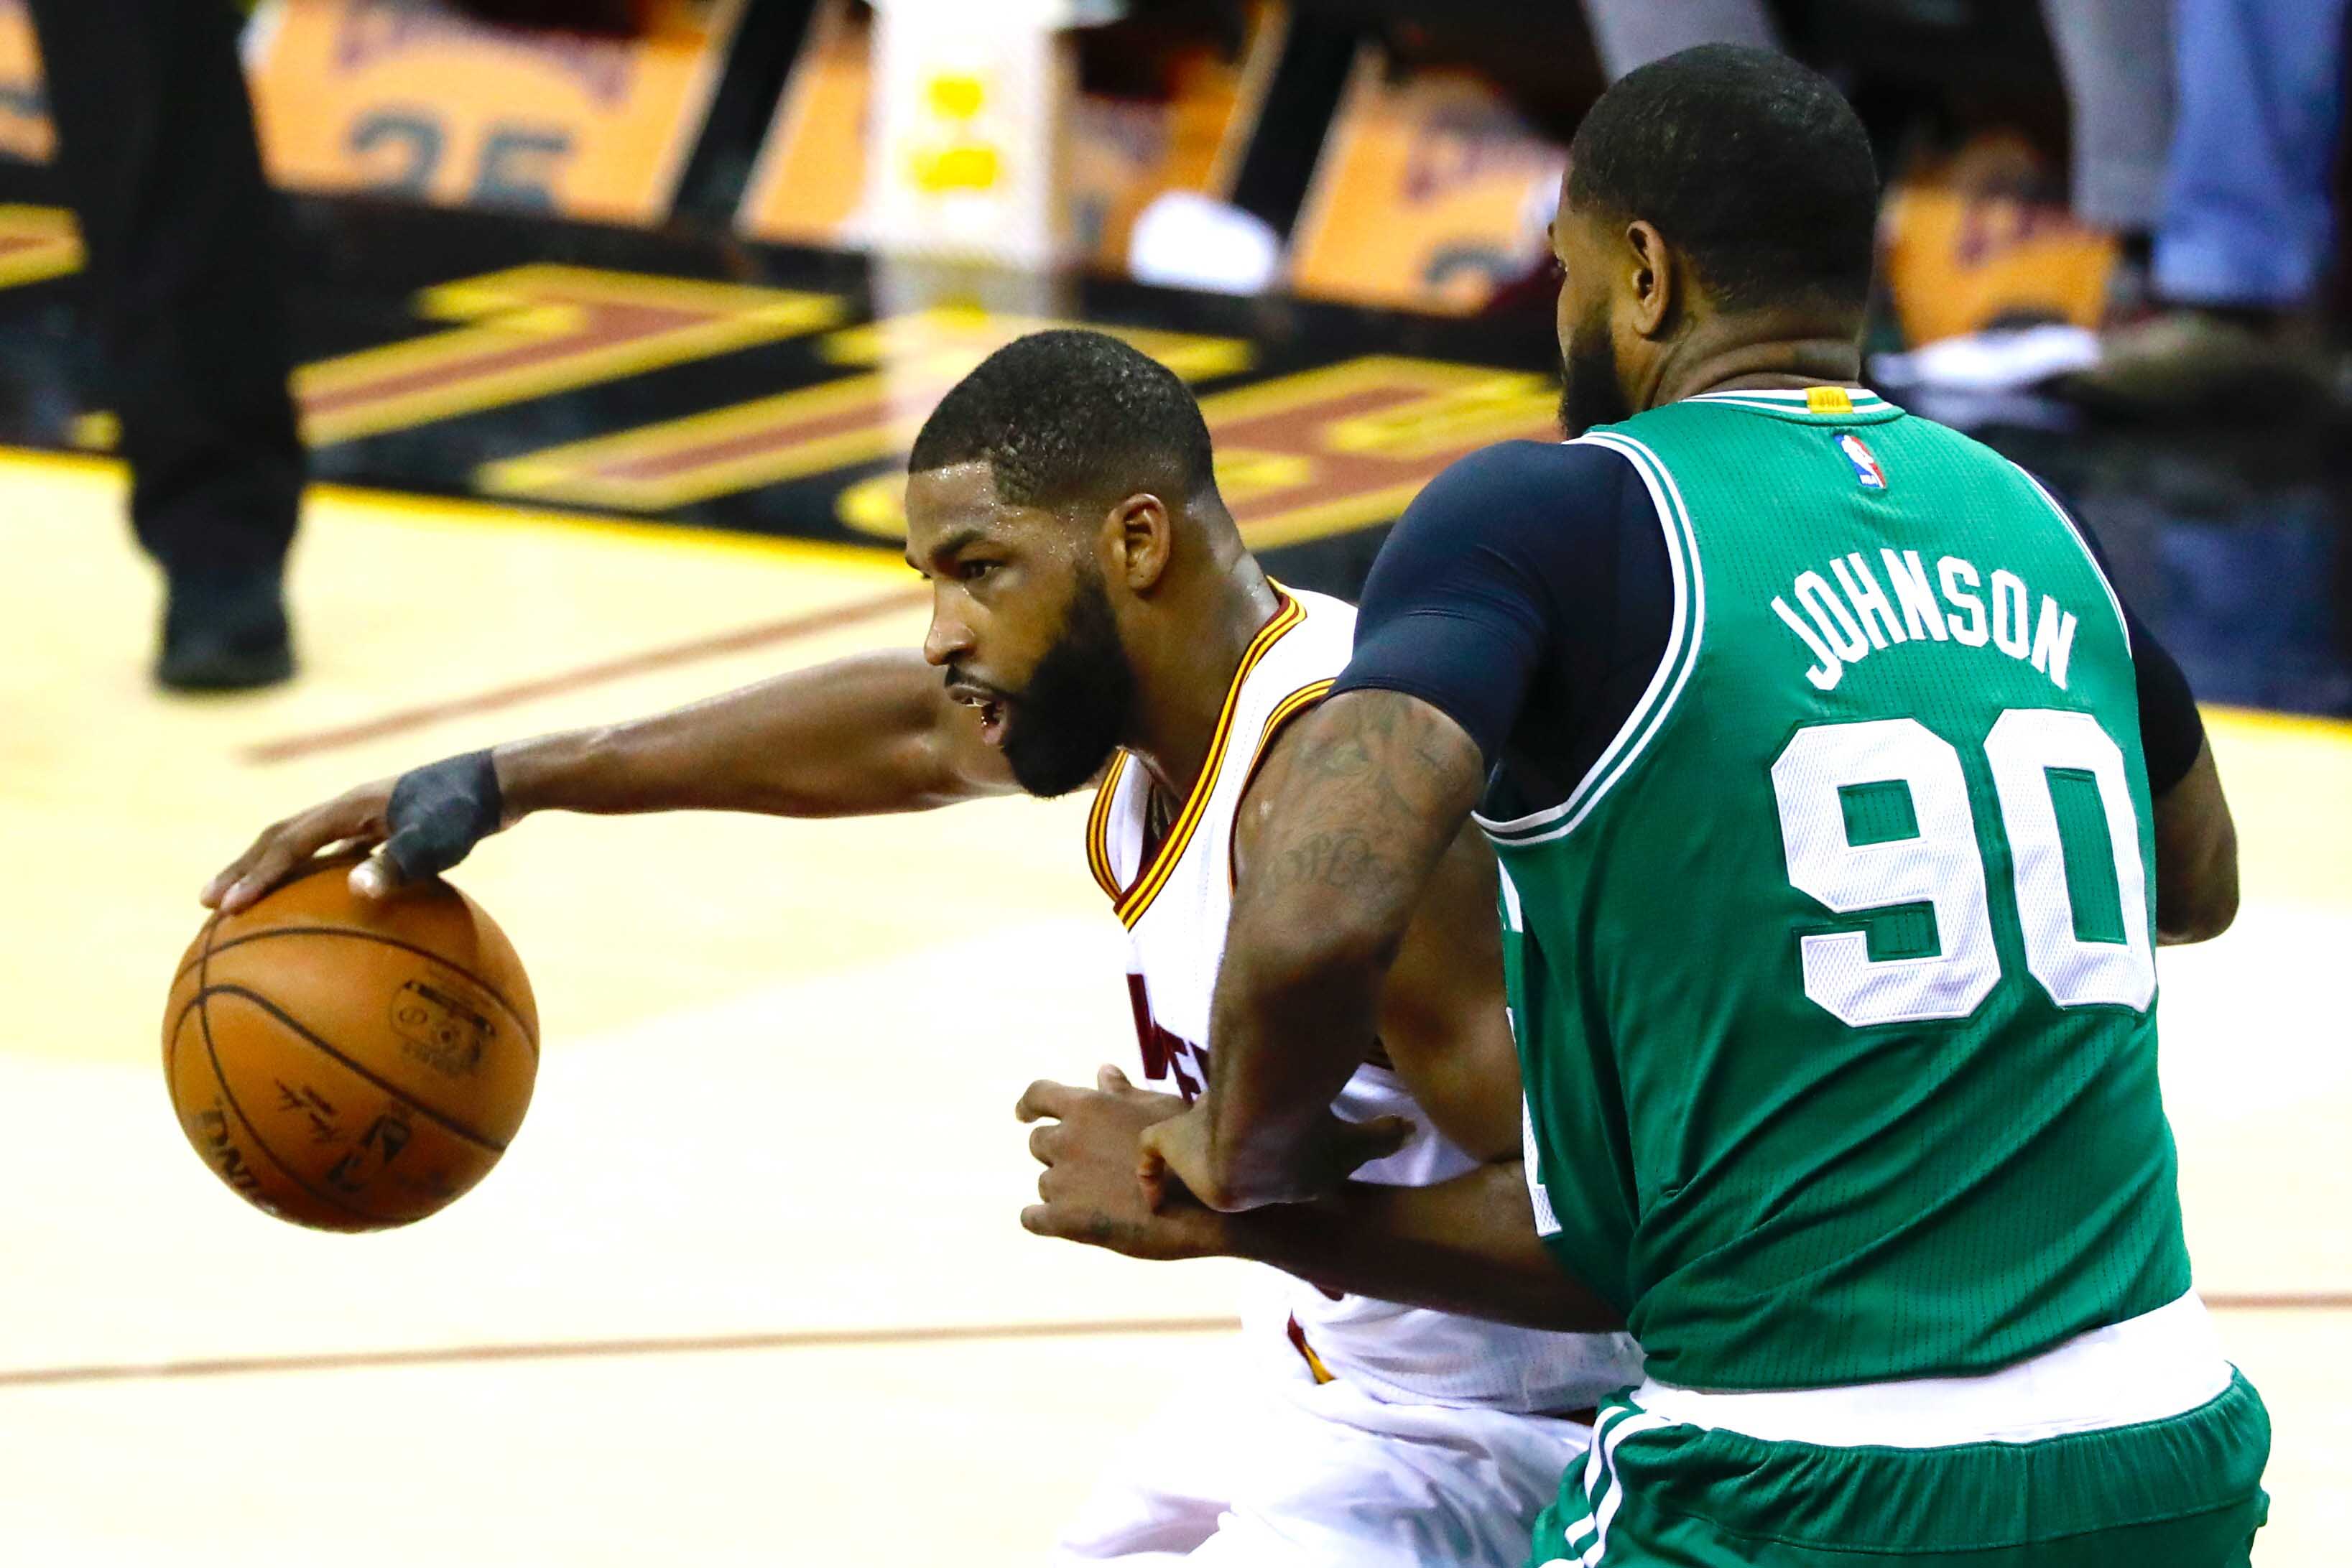 Who are the best free agent signings in Boston Celtics history